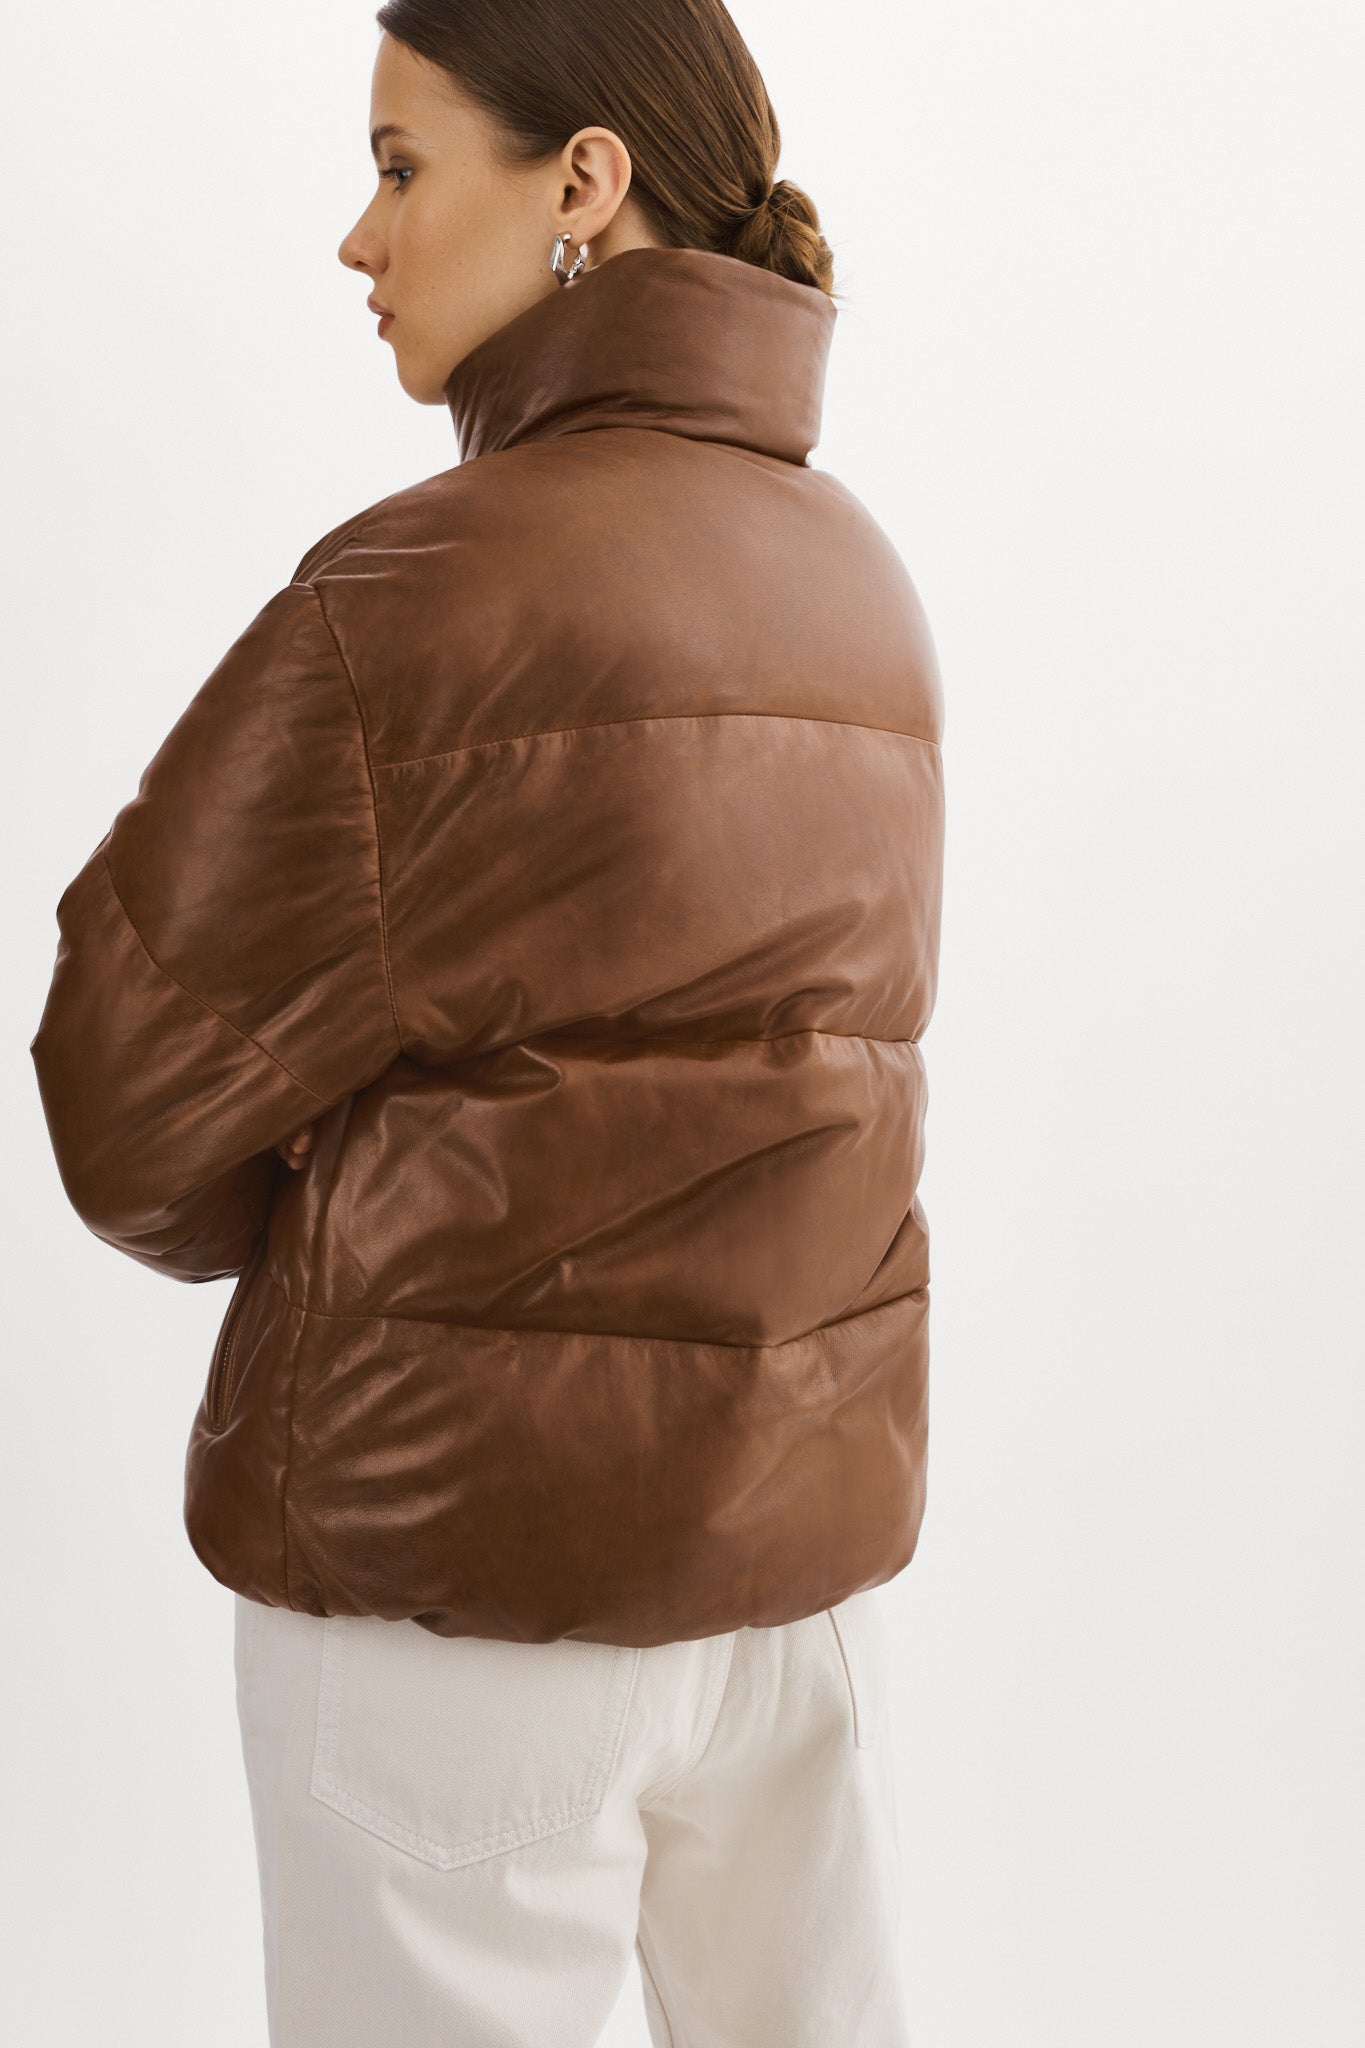 Lamarque Iris Leather Jacket - Brown - Leather Jackets